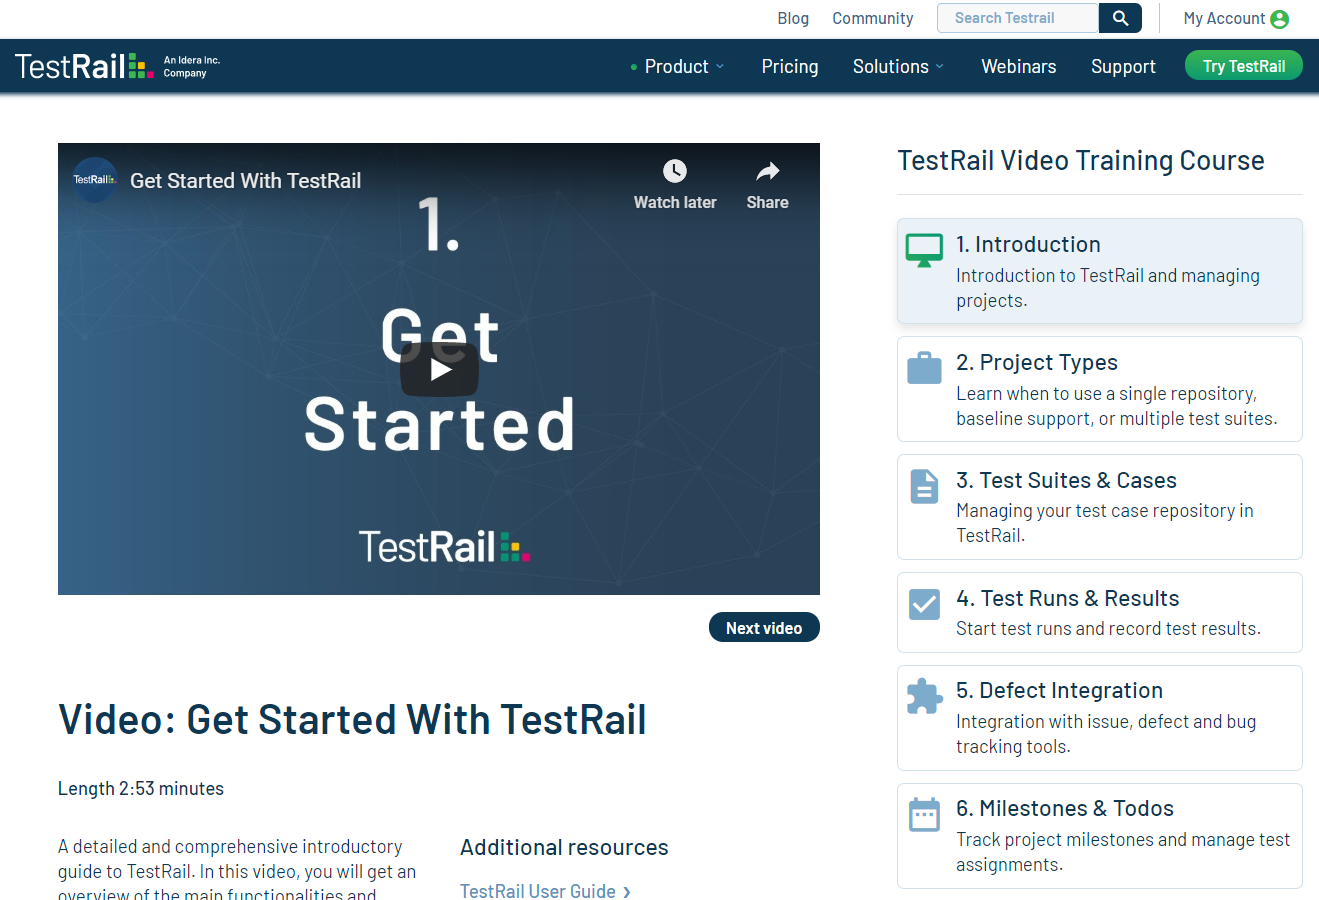 TestRail Video Training Course